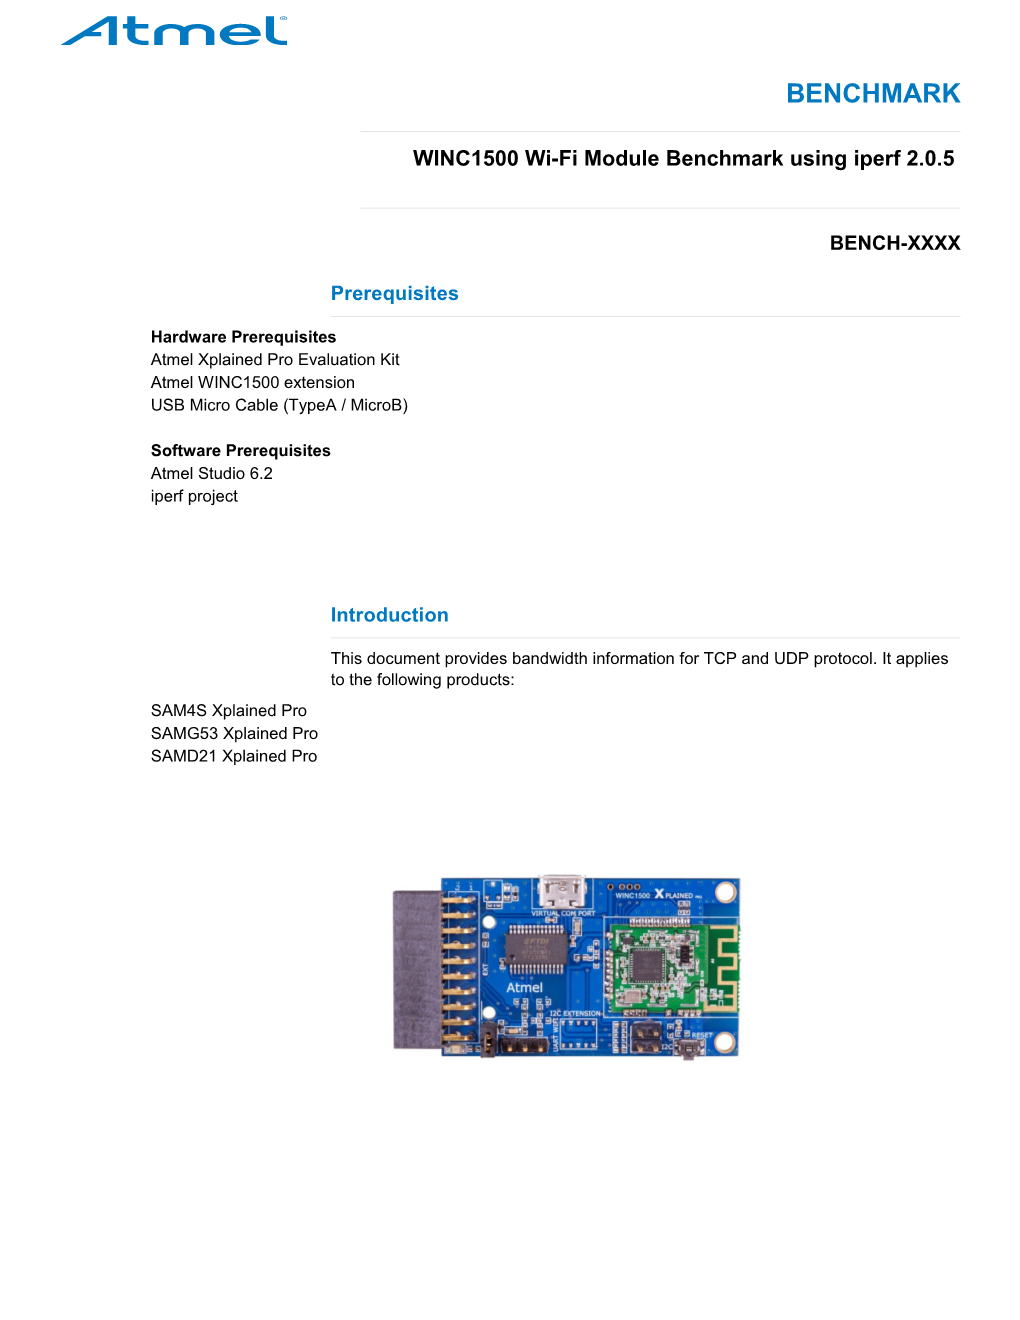 Introduction-To-The-WINC1500-Wifi-Network-Controller-Using-SAM-D21-Xplained-Pro